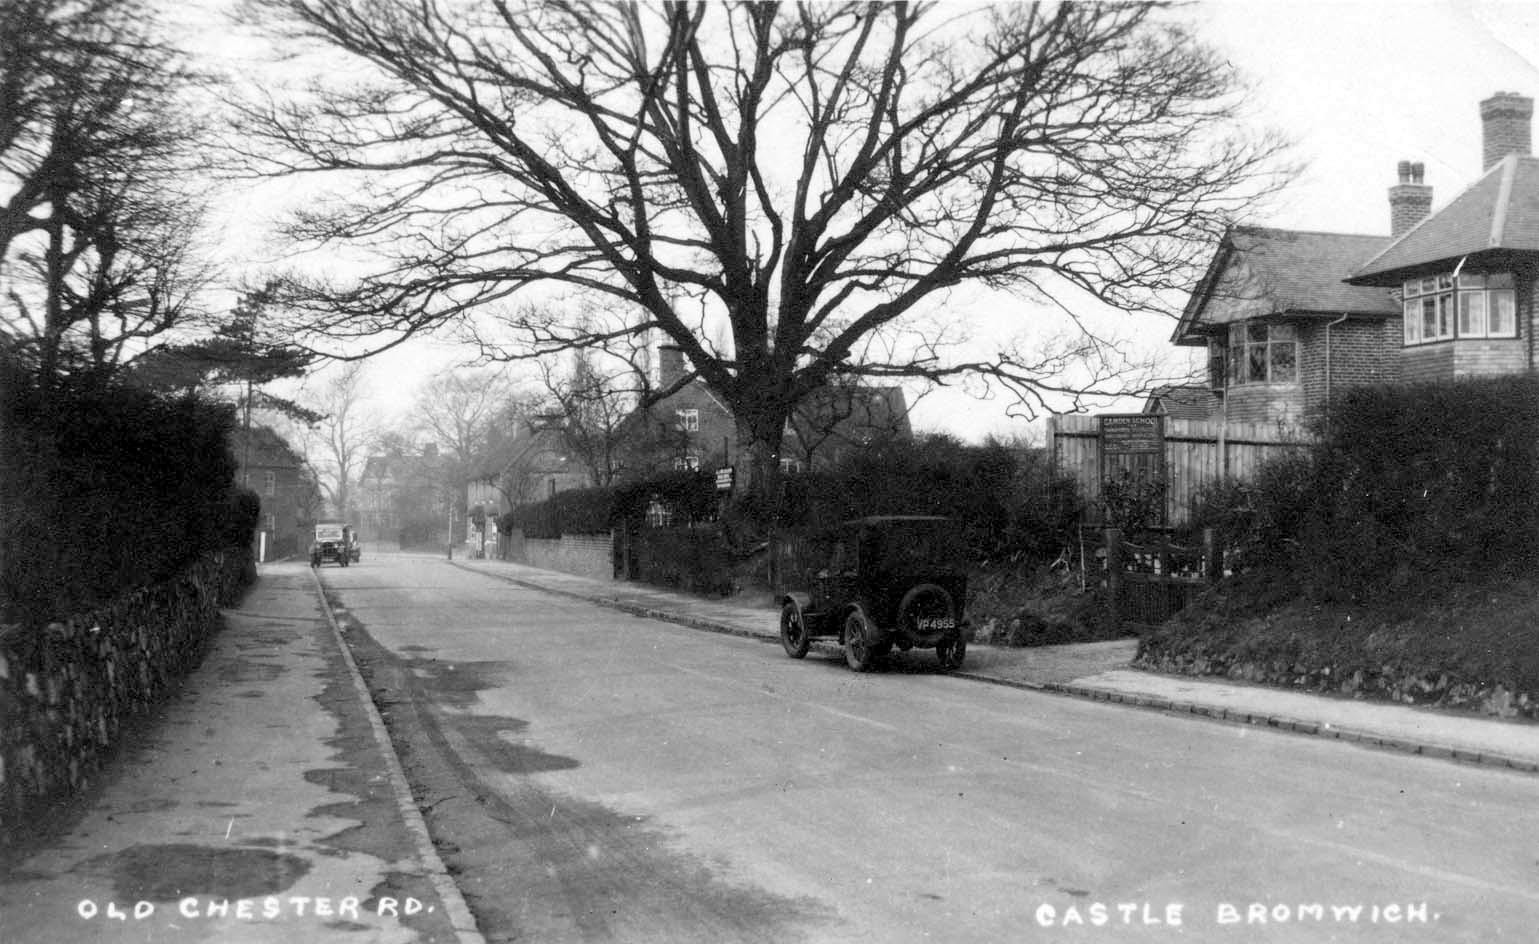 Chester Road 1920? The wall on the left is that of the old school on the Green. The school has gone, but the wall still stands. The house on the right has a sign, Camden School', a small private school; the house is still there. 